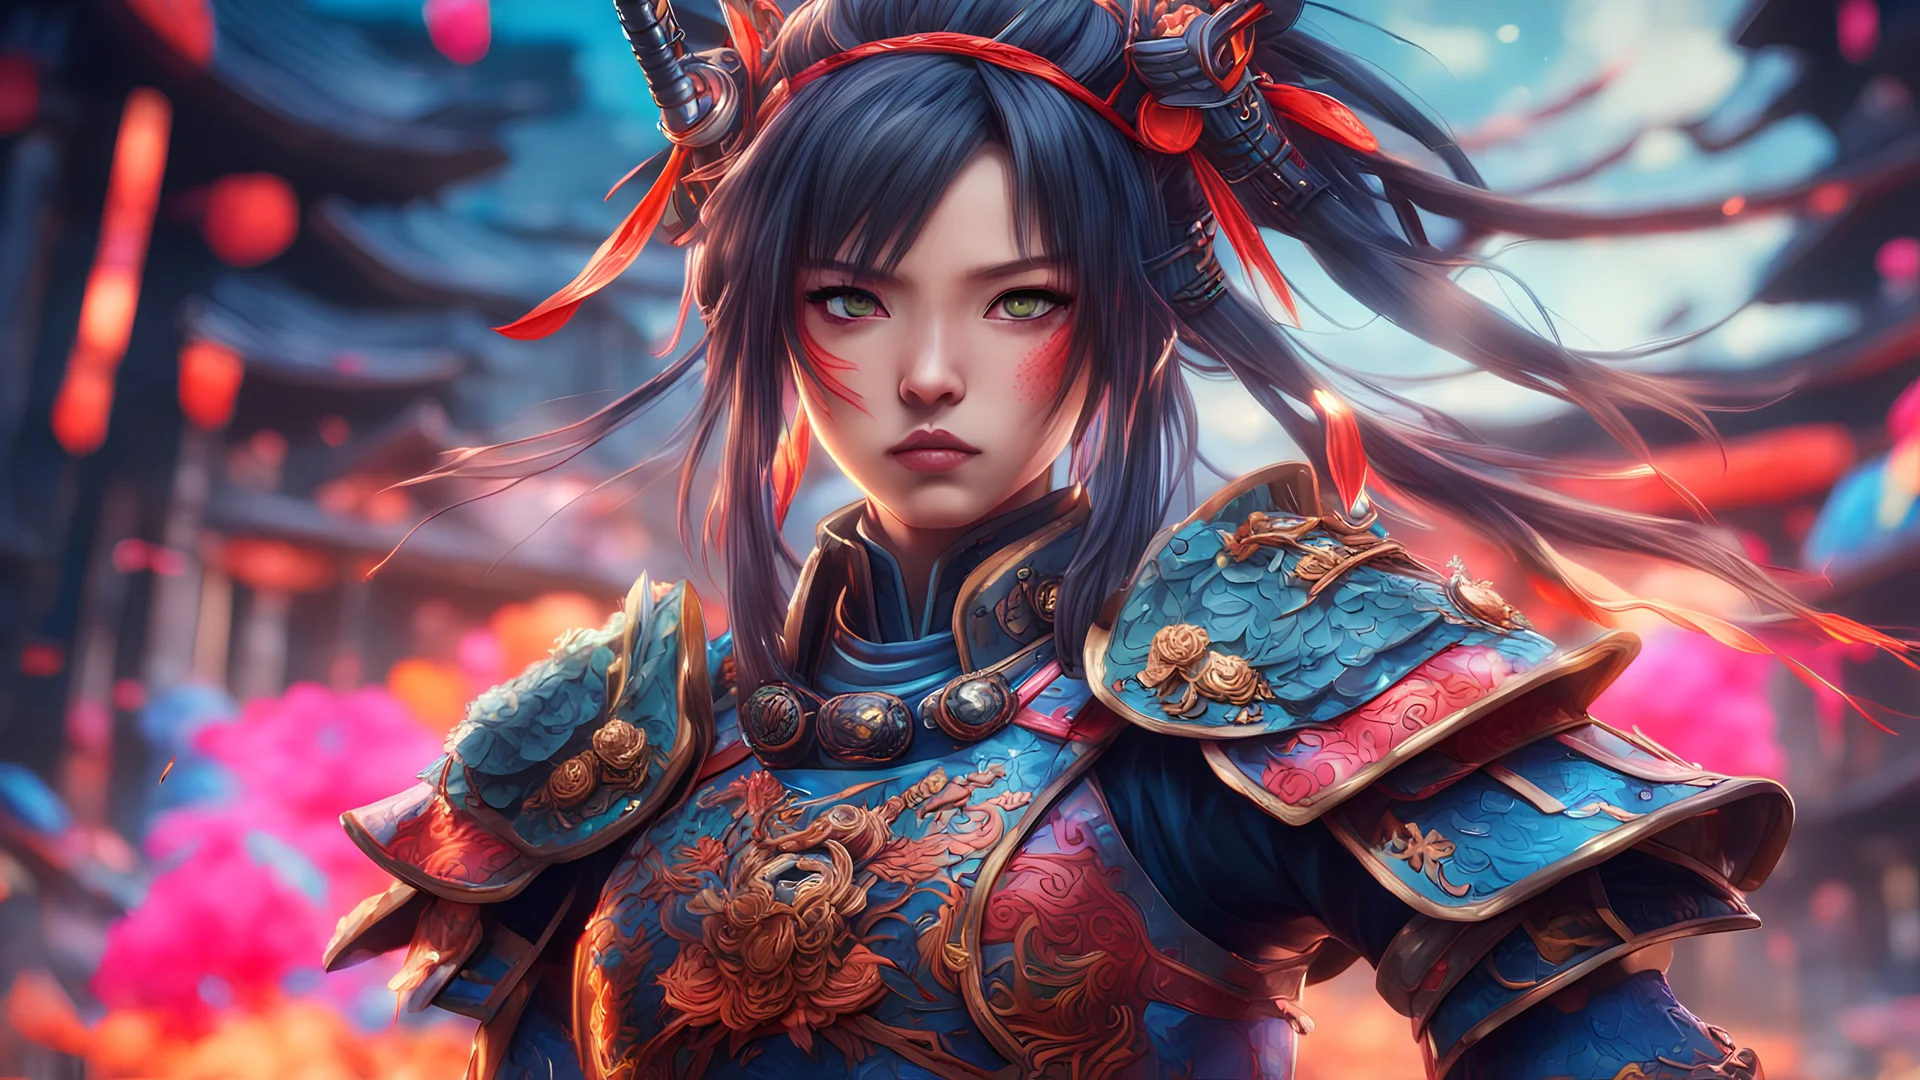 A fiercely determined anime girl with a sharp gaze, clad in intricate samurai armor adorned with vibrant colors that pop in 8K resolution. This stunning image captures her resolute expression and fierce demeanor, standing out against a detailed background. The level of detail is exceptional, with every intricate design and hue showcased in stunning high definition. This artwork is a masterpiece of modern digital art, showcasing the fusion of traditional and contemporary elements in a visually st